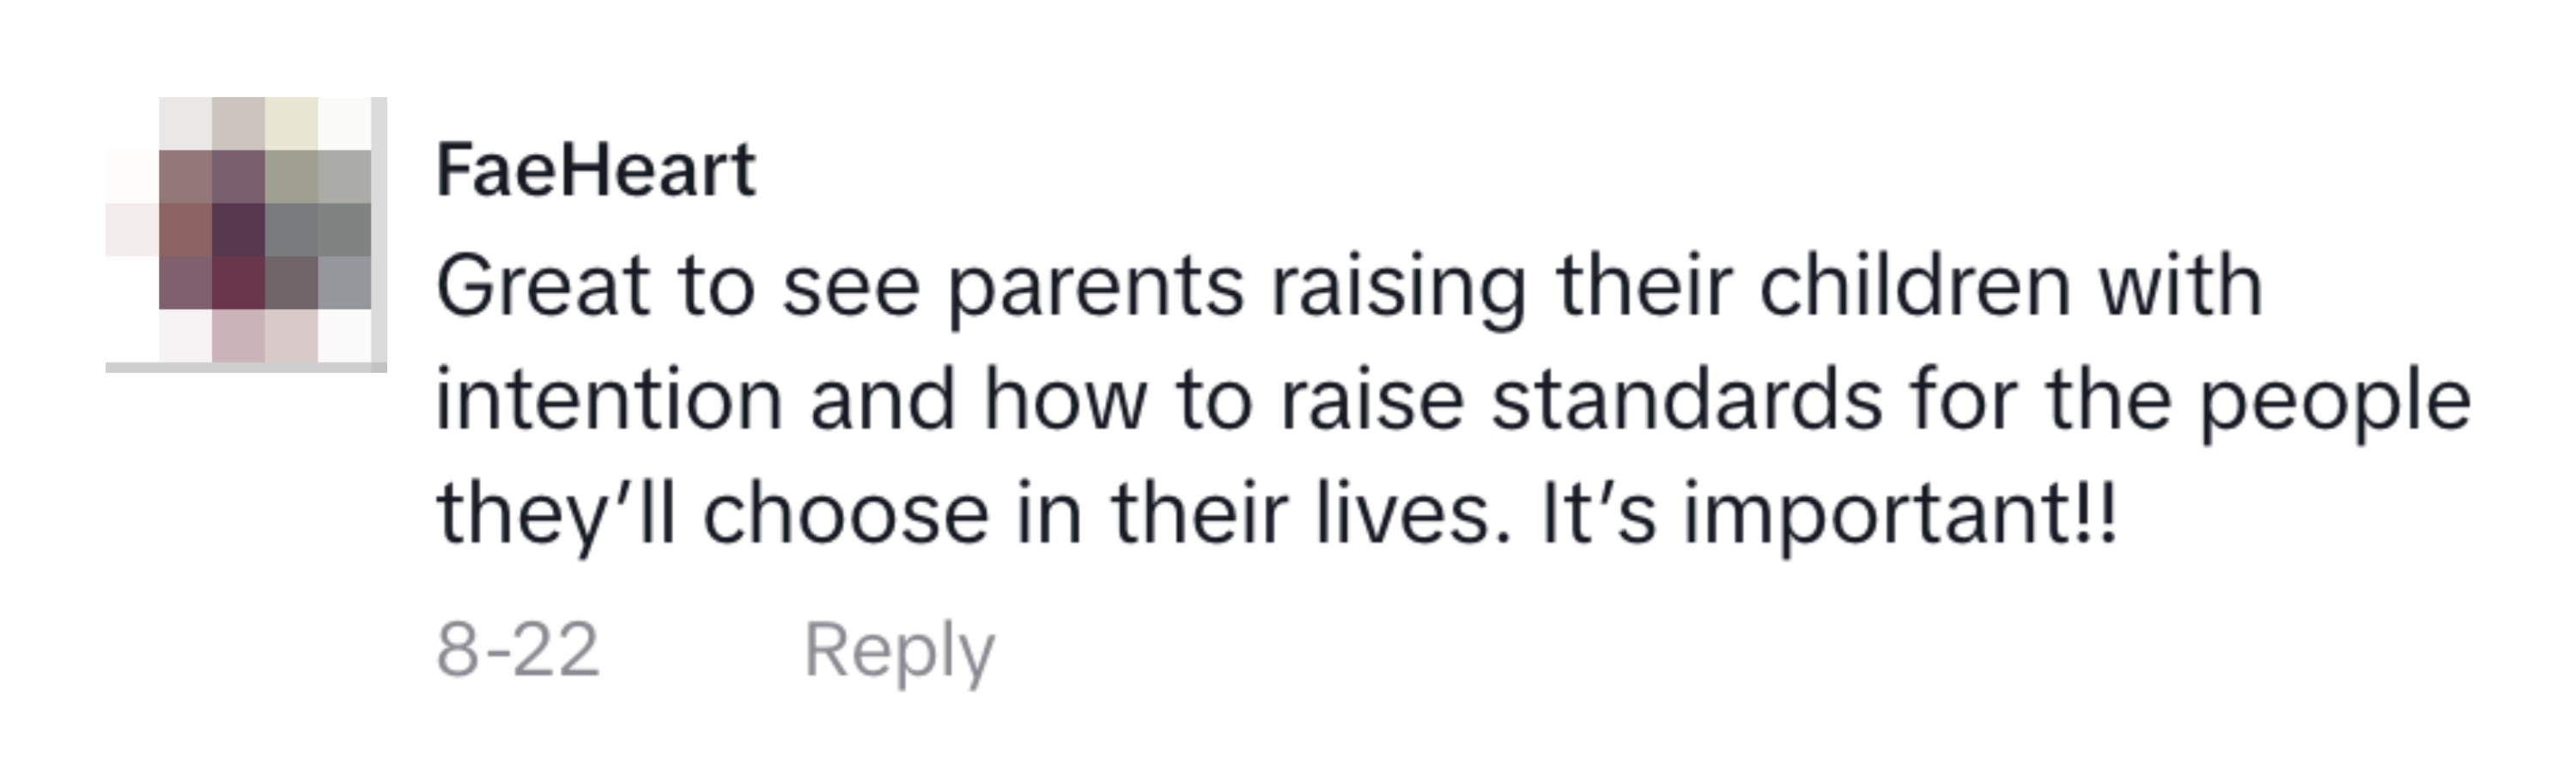 &quot;Great to see parents raising their children with intention and how to raise standards for the people they&#x27;ll choose in their lives&quot;